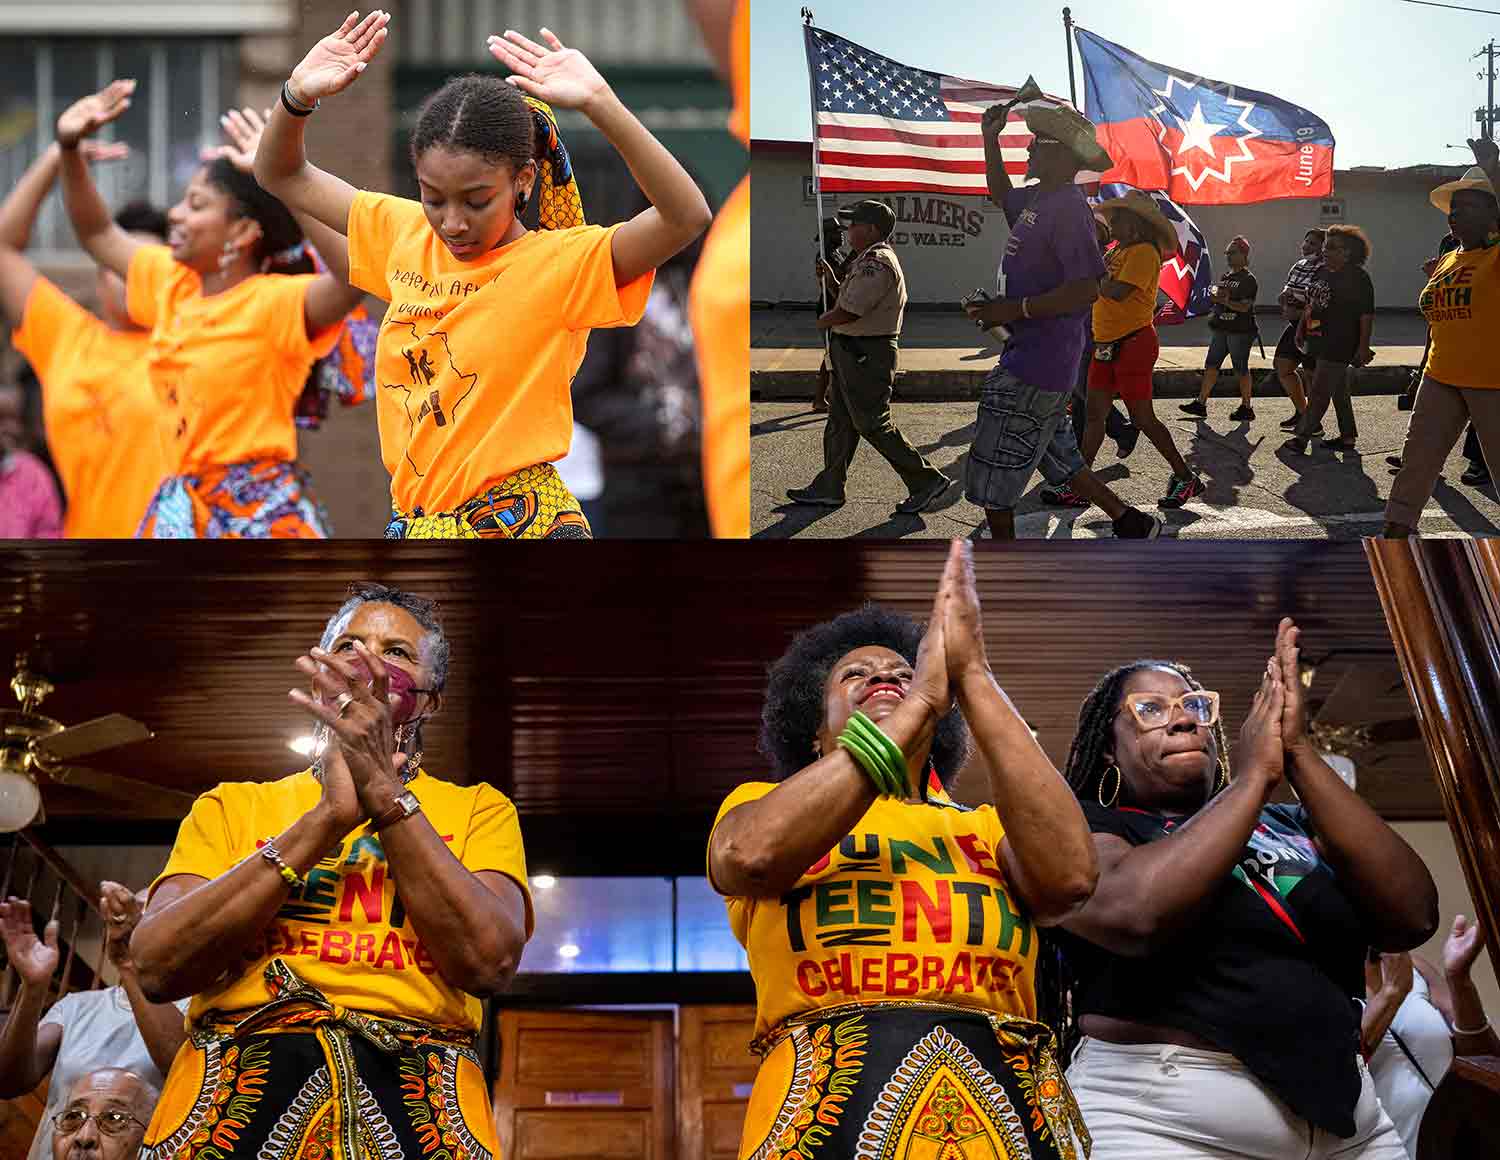 Three panels showing dancers, a parade with flags, and three people clapping for Juneteenth.